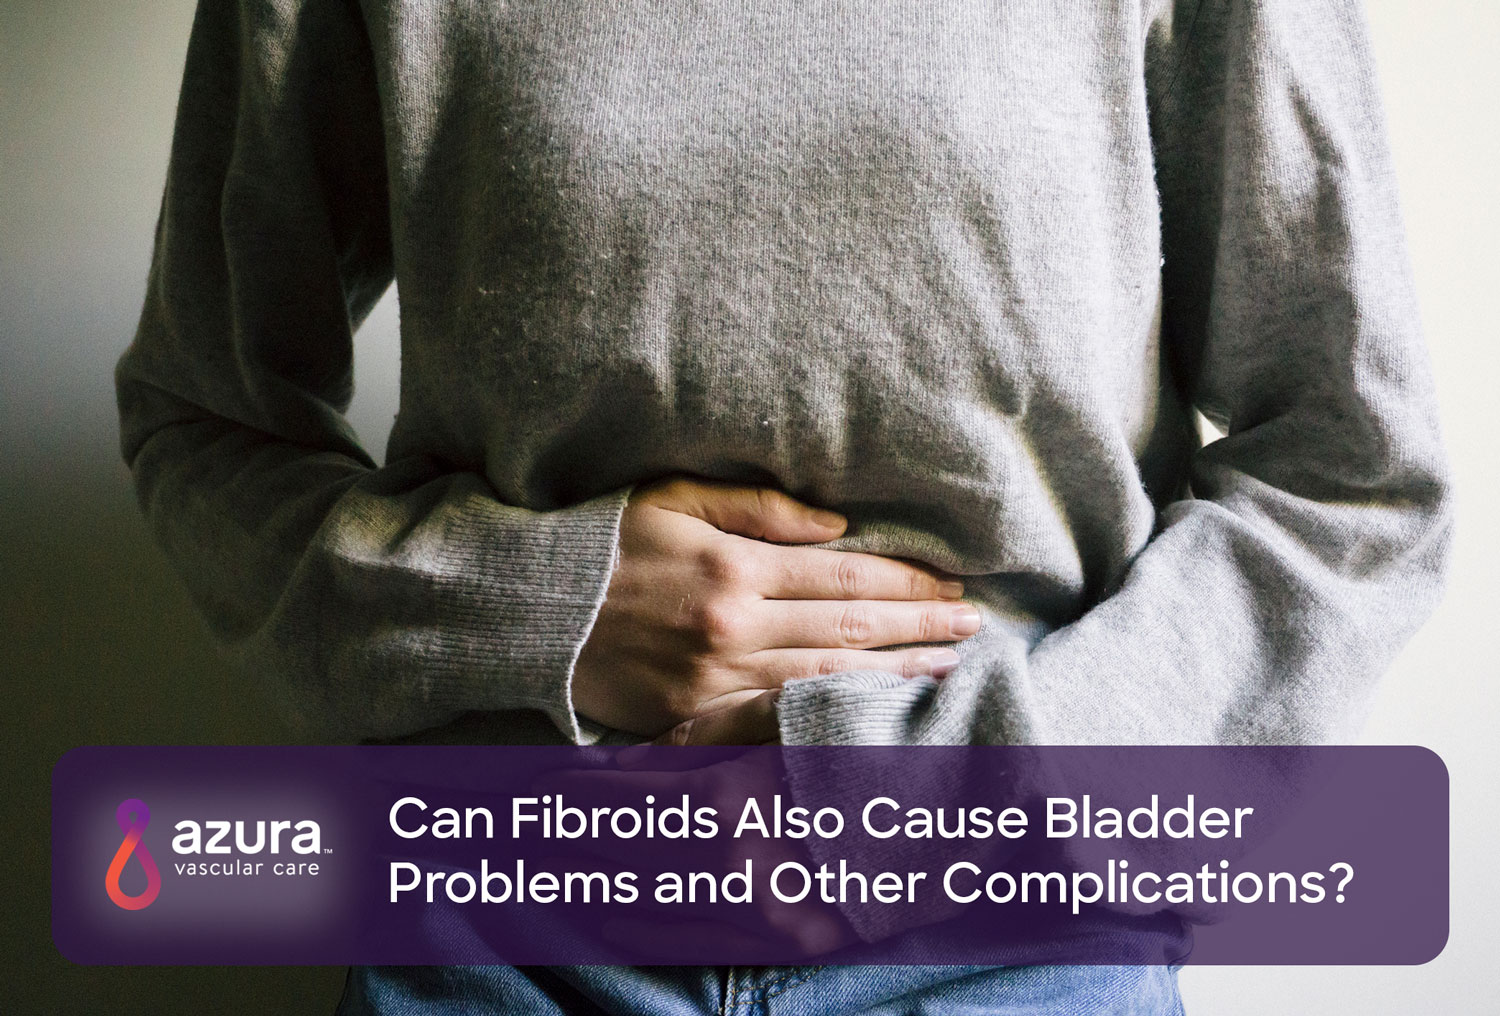 https://www.azuravascularcare.com//assets/Can-Fibroids-Also-Cause-Bladder-Problems-and-Other-Complications.jpg